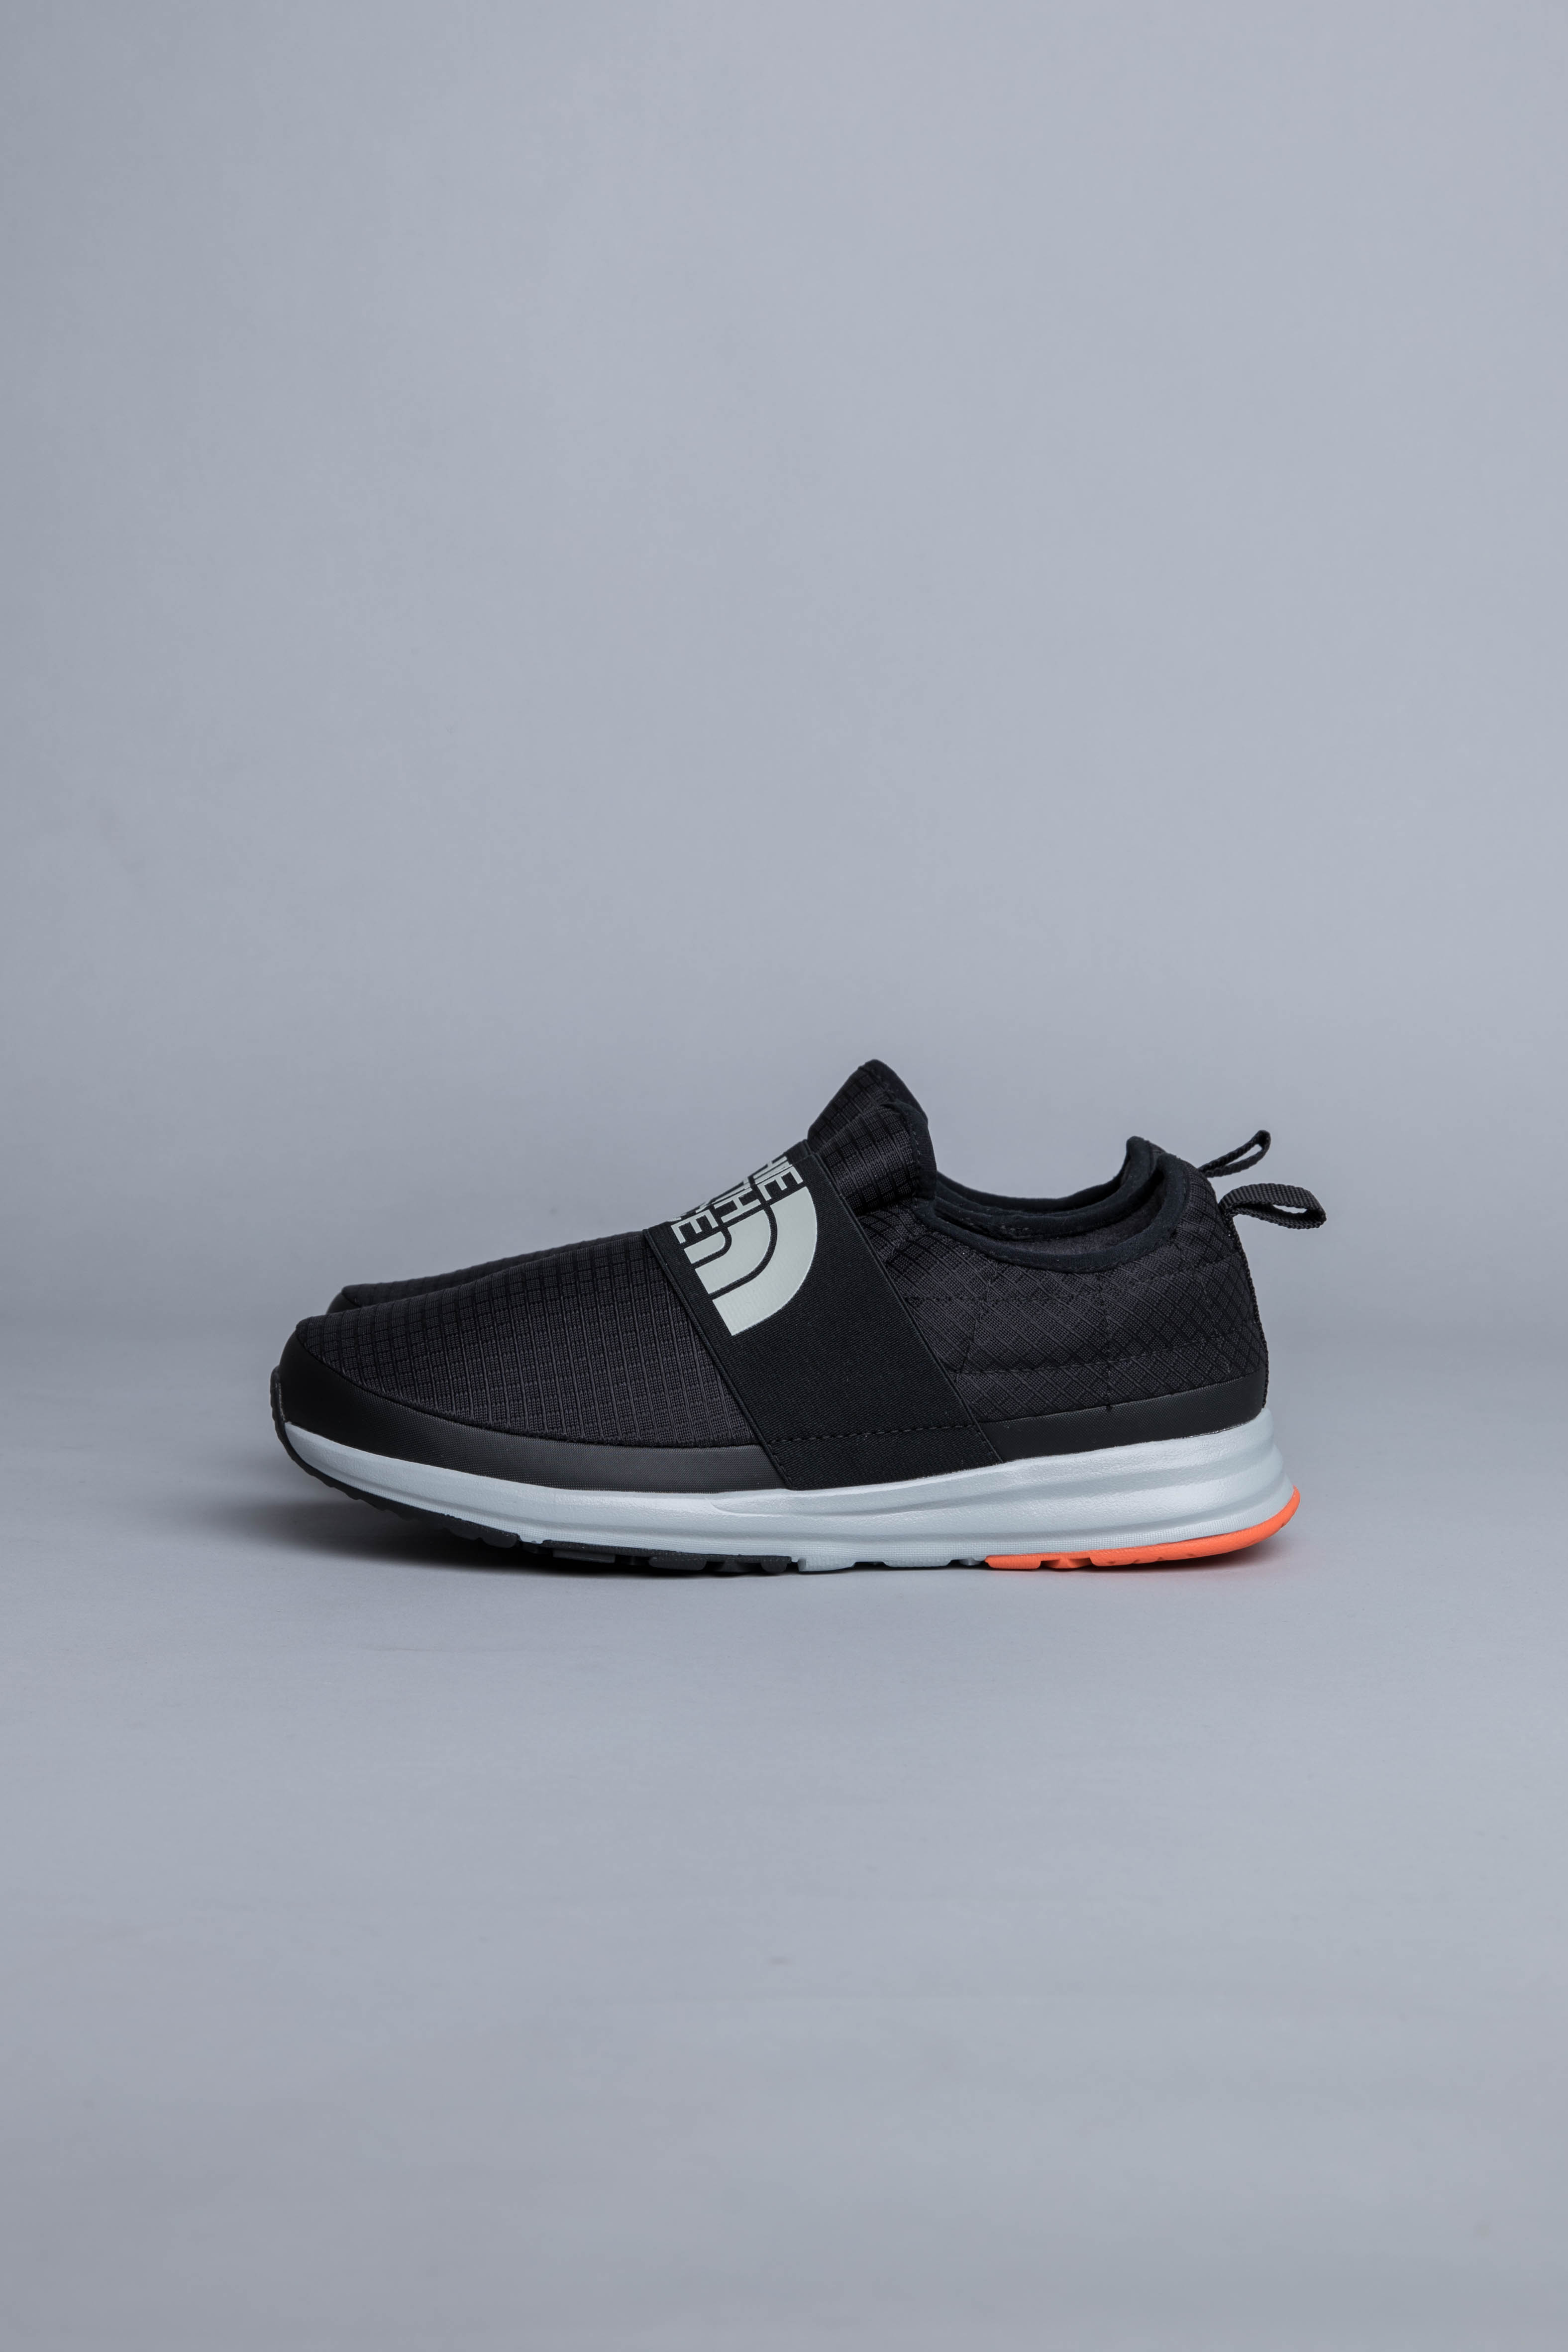 the north face cadman nse moc sneaker 